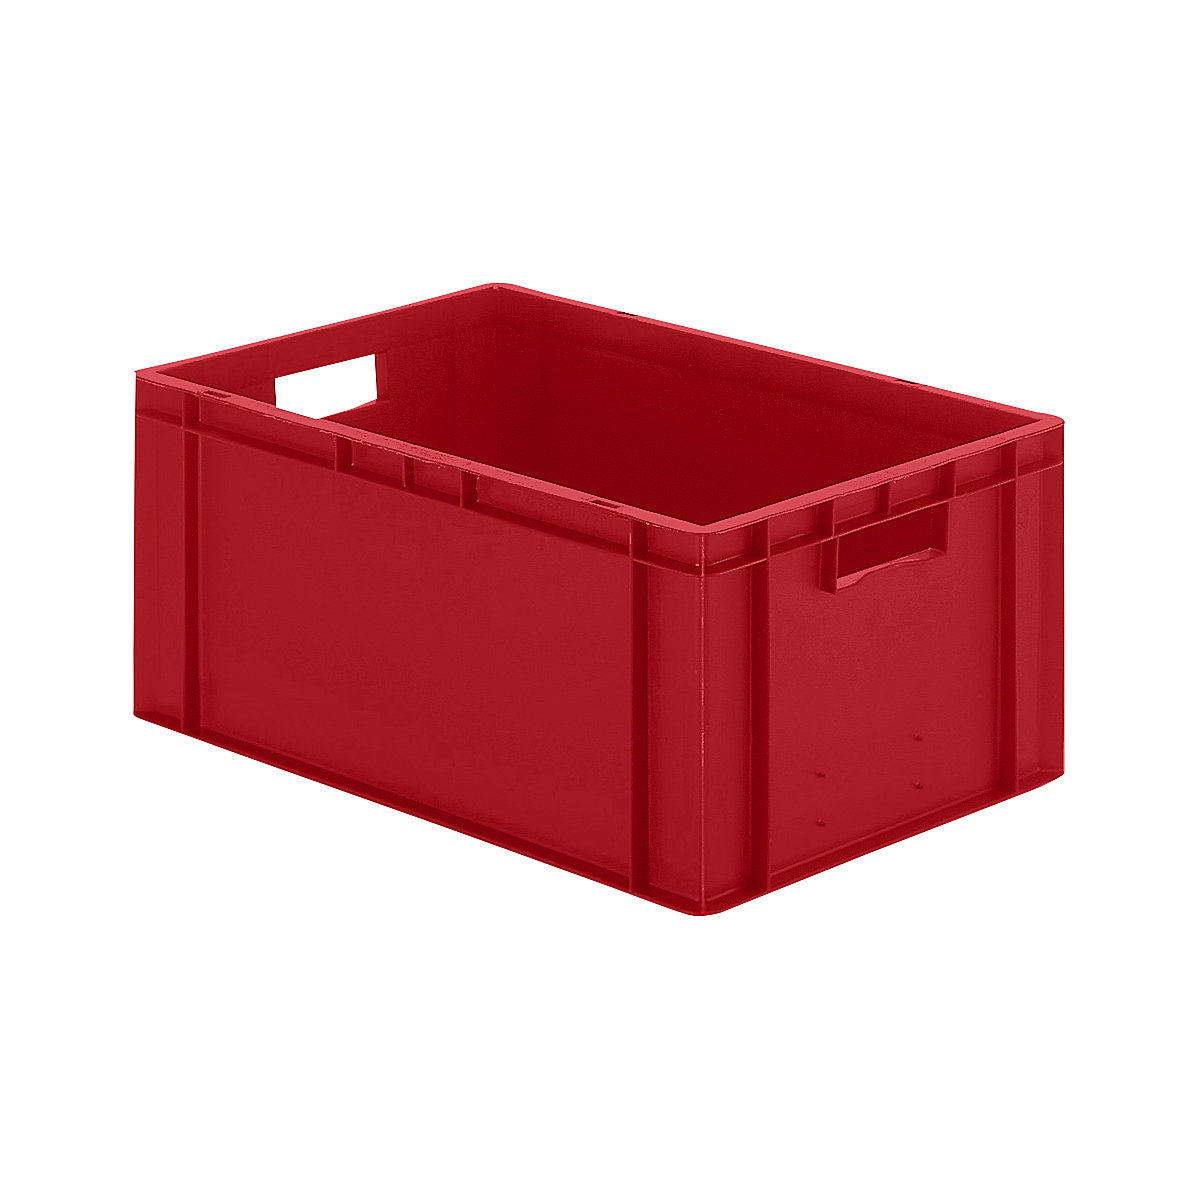 Euro stacking container, closed walls and base, LxWxH 600 x 400 x 270 mm, red, pack of 5